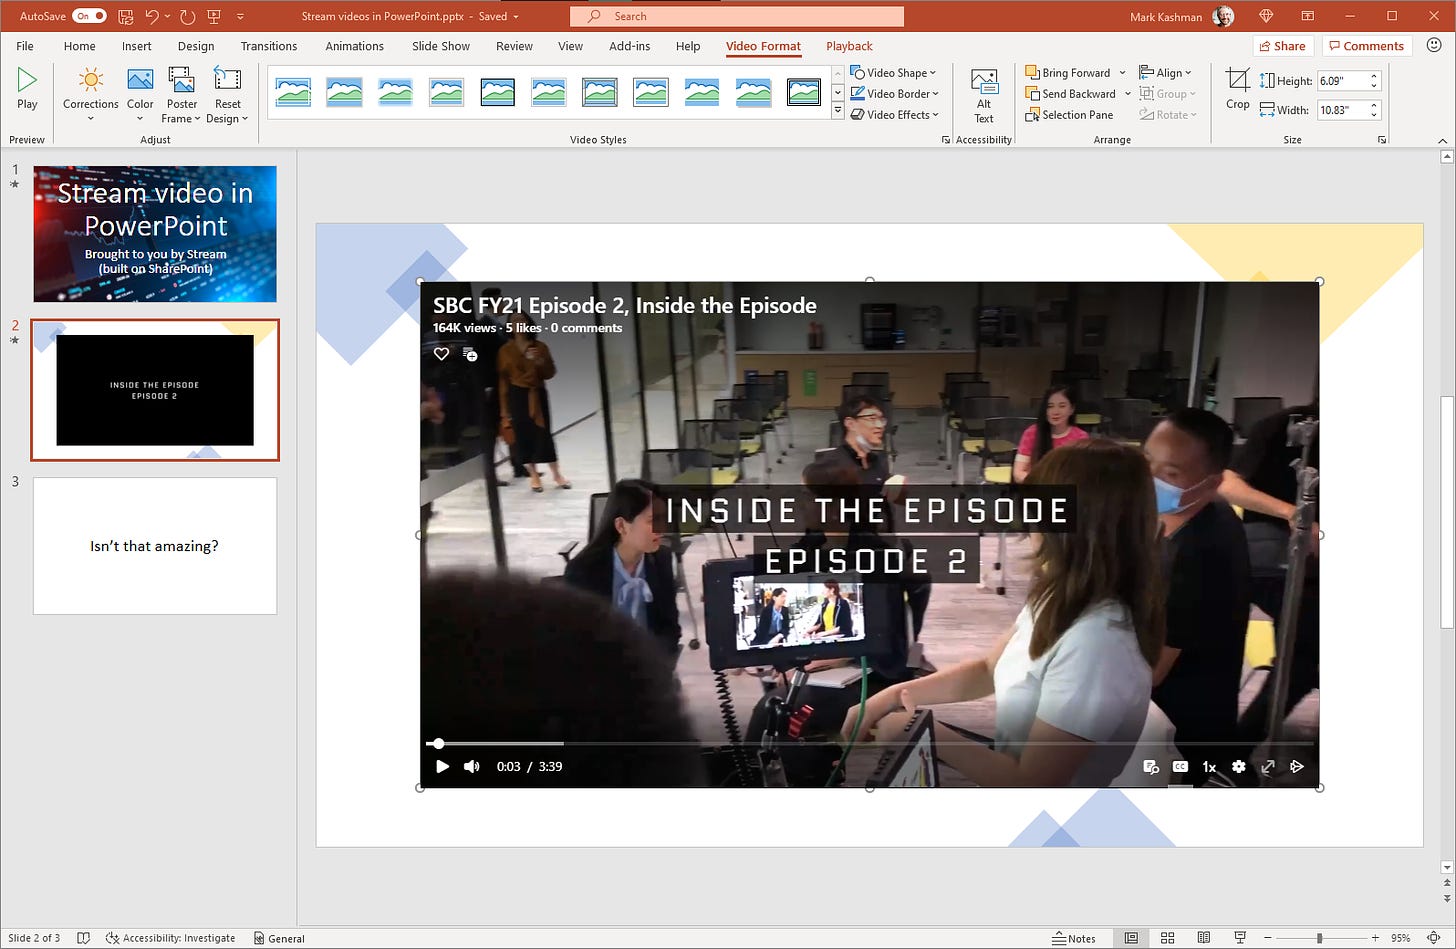 Stream video inserted onto a PowerPoint slide to play inline during the Slide Show.